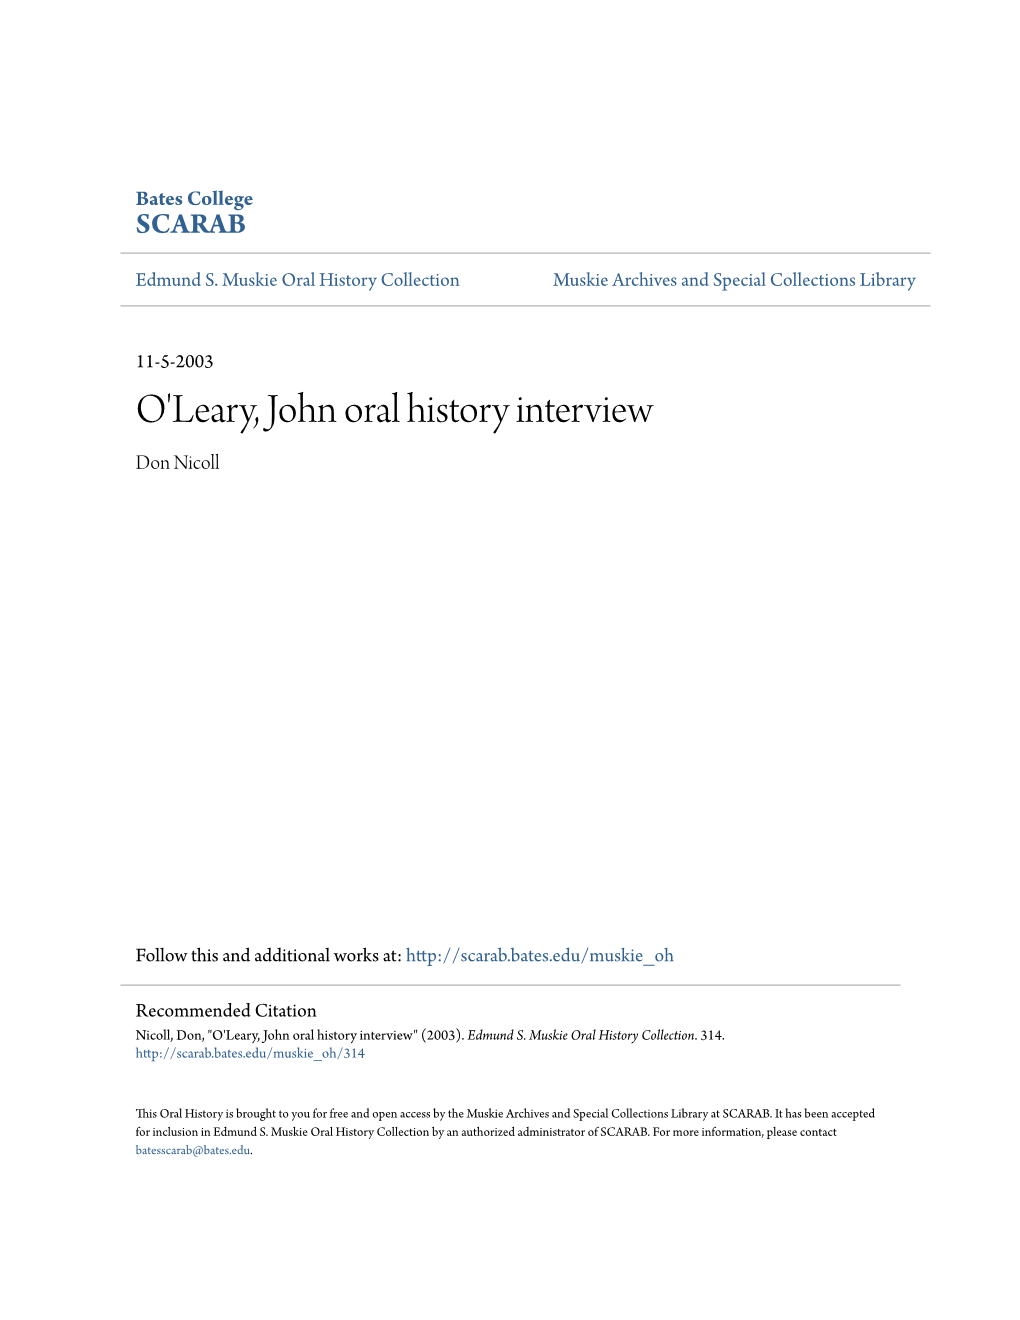 O'leary, John Oral History Interview Don Nicoll